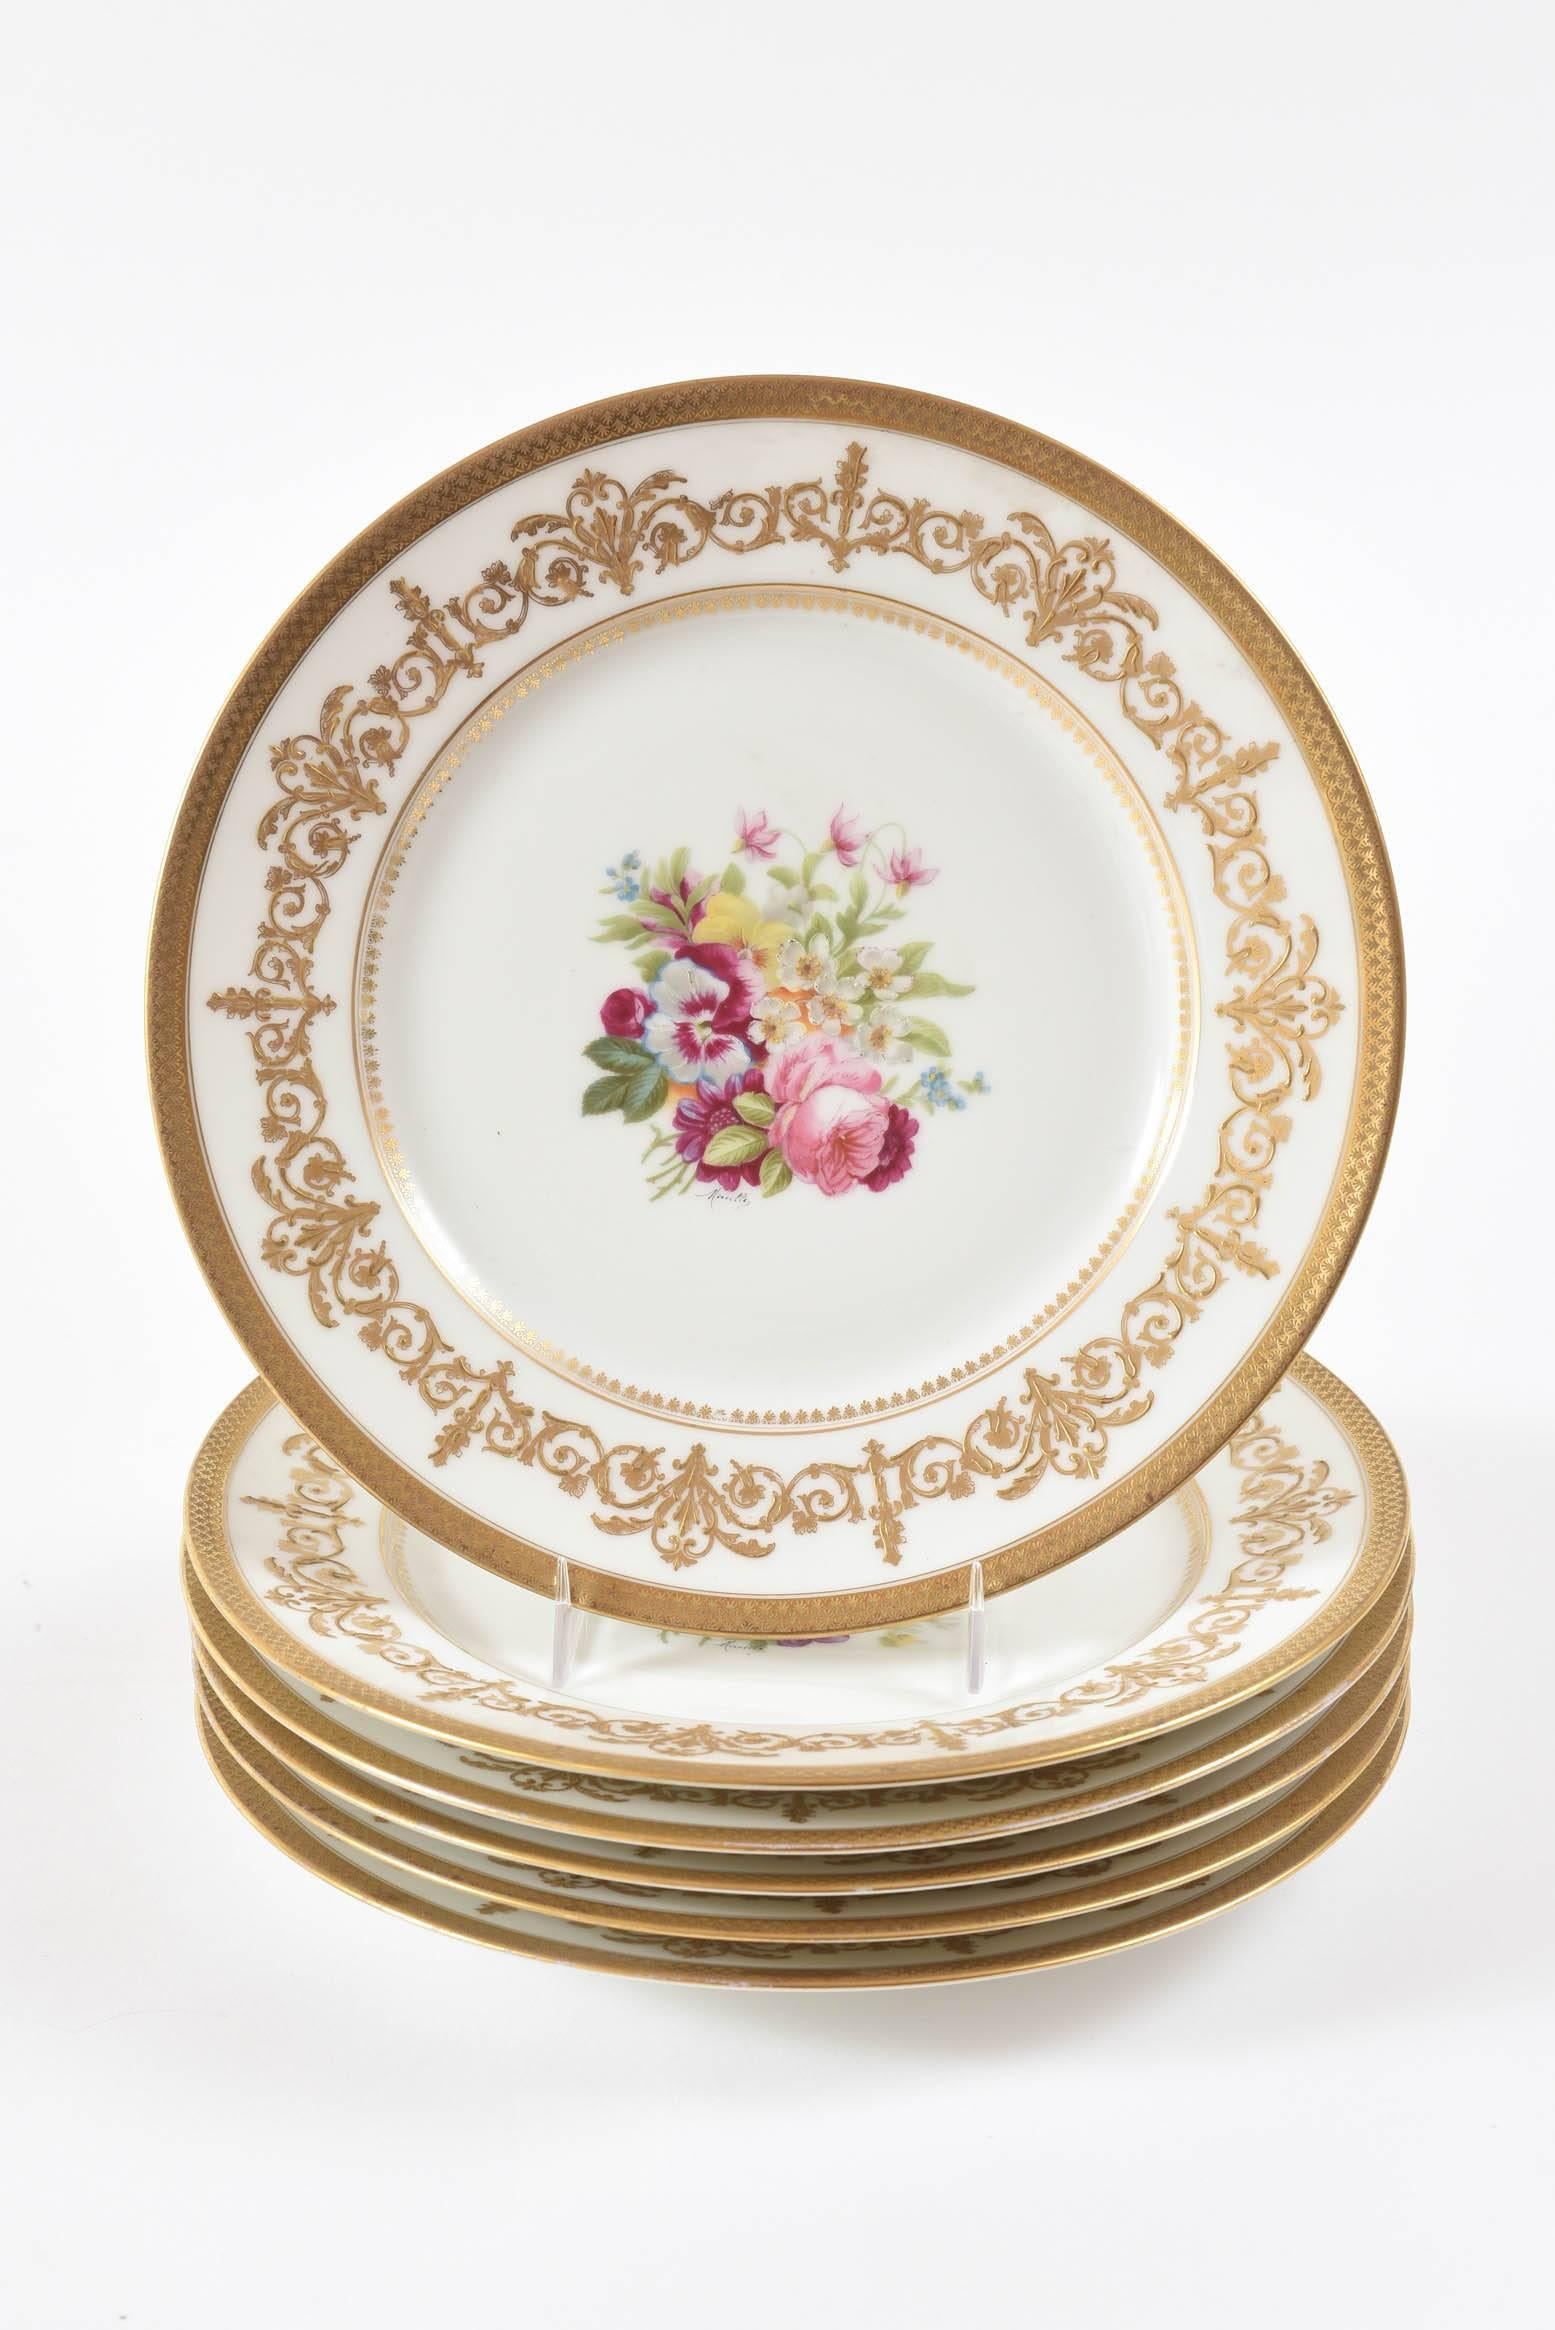 Early 20th Century Antique Limoges Floral Plates, Raised Gilt Accents, Set of Six